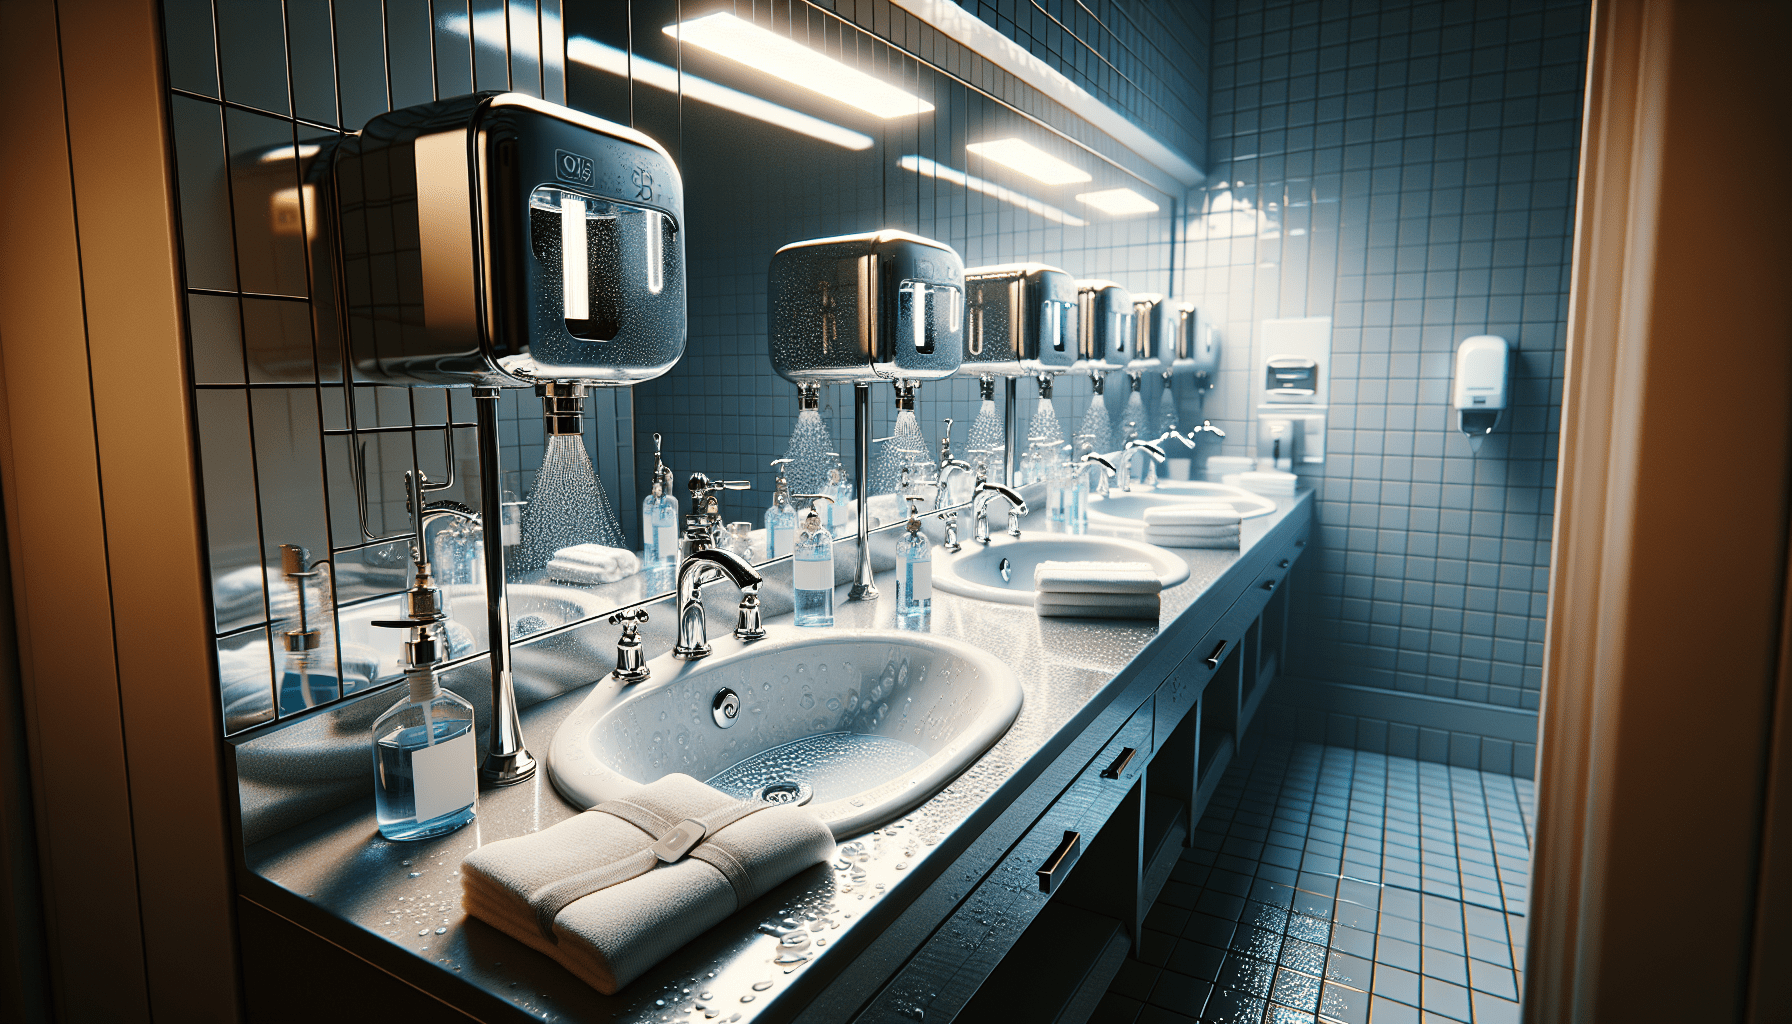 A modern public bathroom interior with multiple sinks, faucets, mirrors, and hand dryers, featuring blue tiled walls and sleek counter design under ambient lighting.